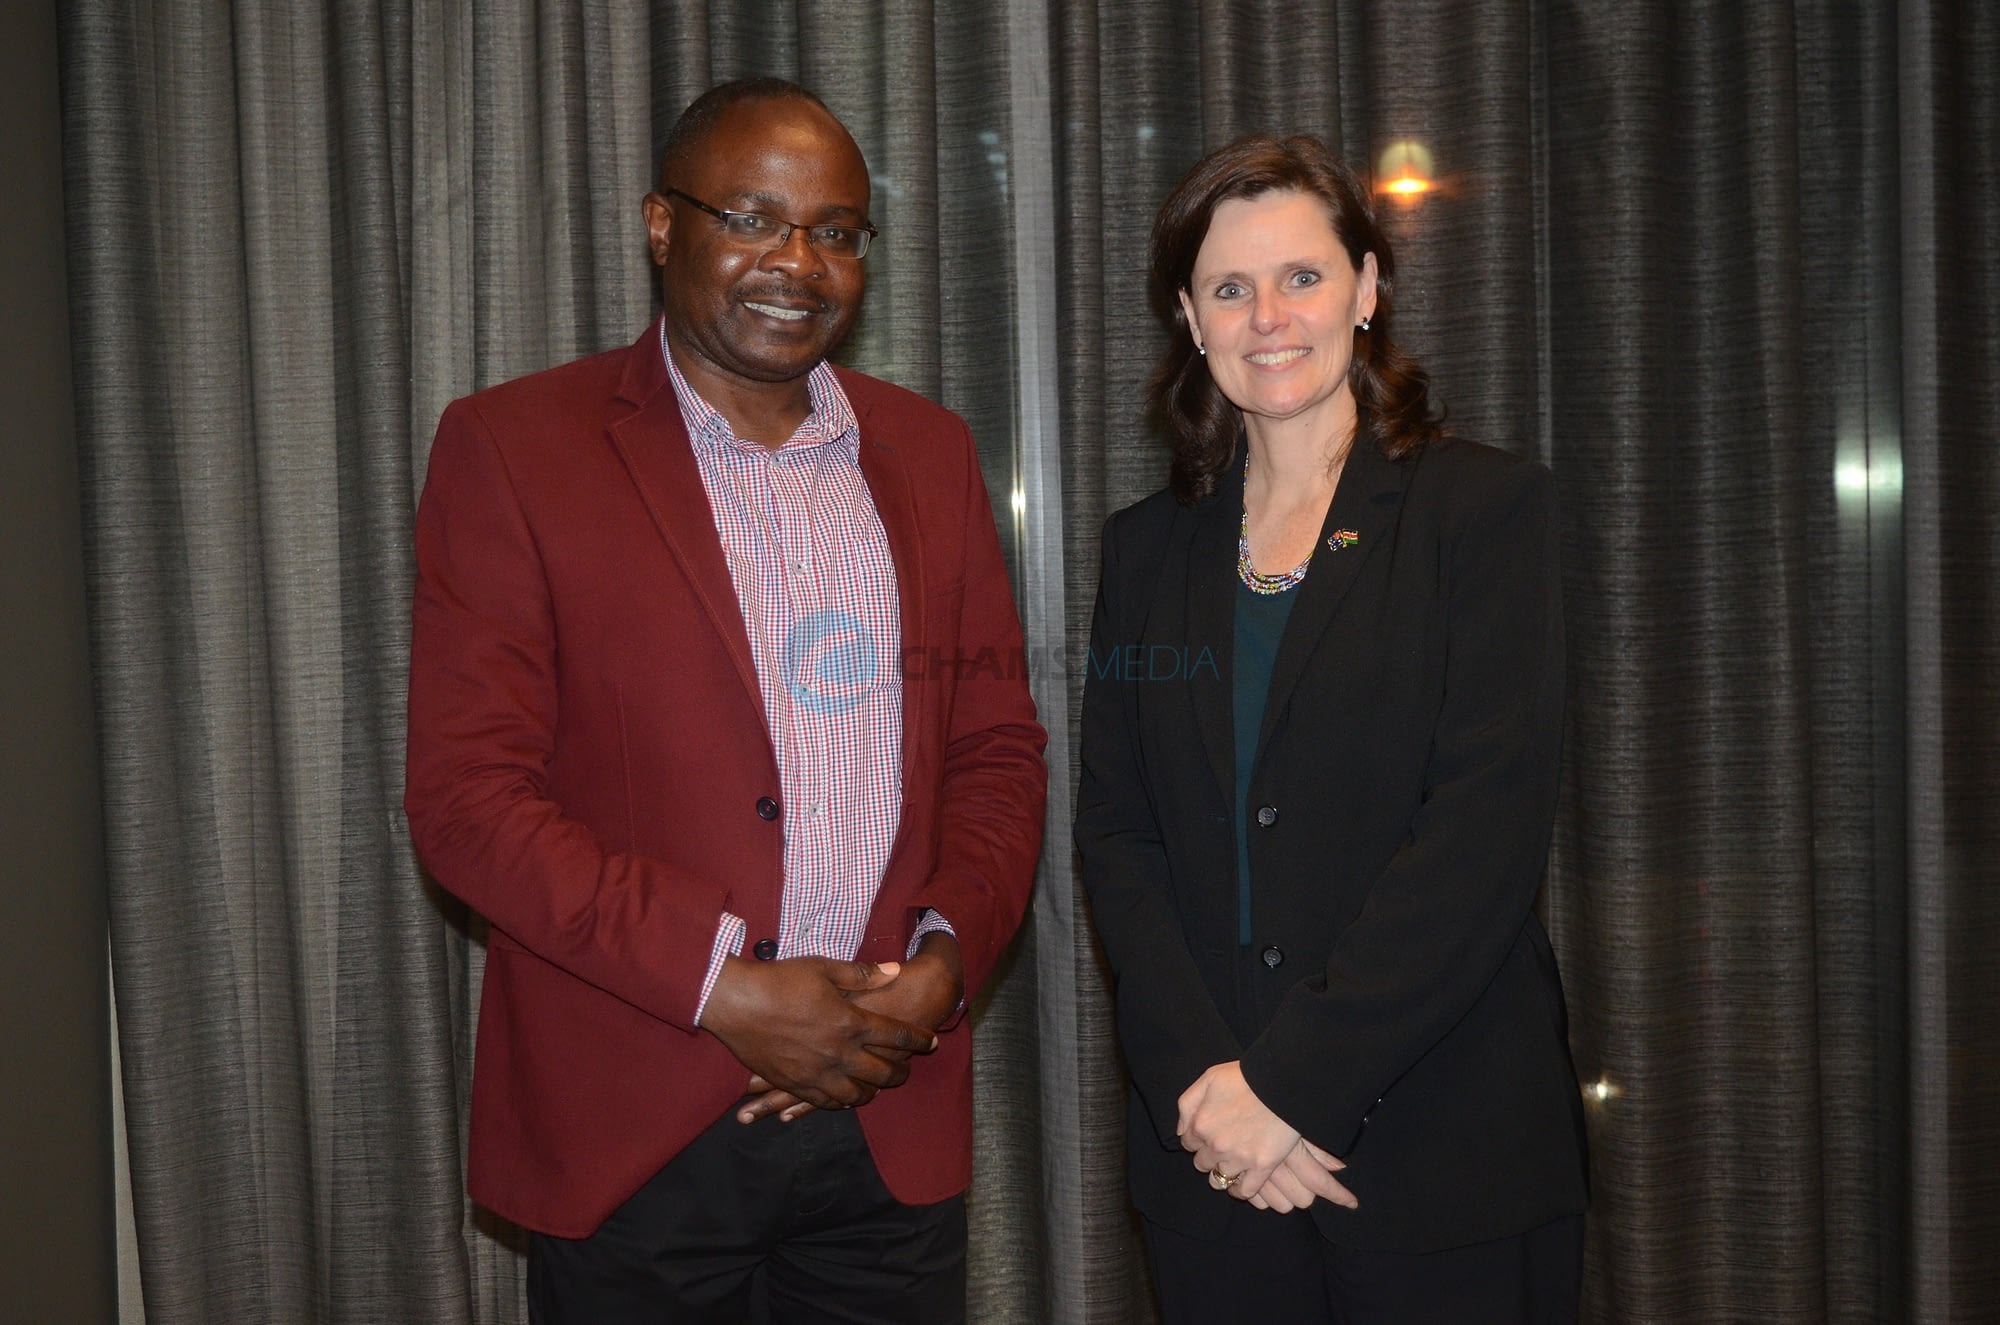 CHAMS Media CEO Alex Chamwada with Australia's High Commissioner to Kenya Alison Chartress in Perth City September 2019 during the Africa Oil, Gas and Energy Conference